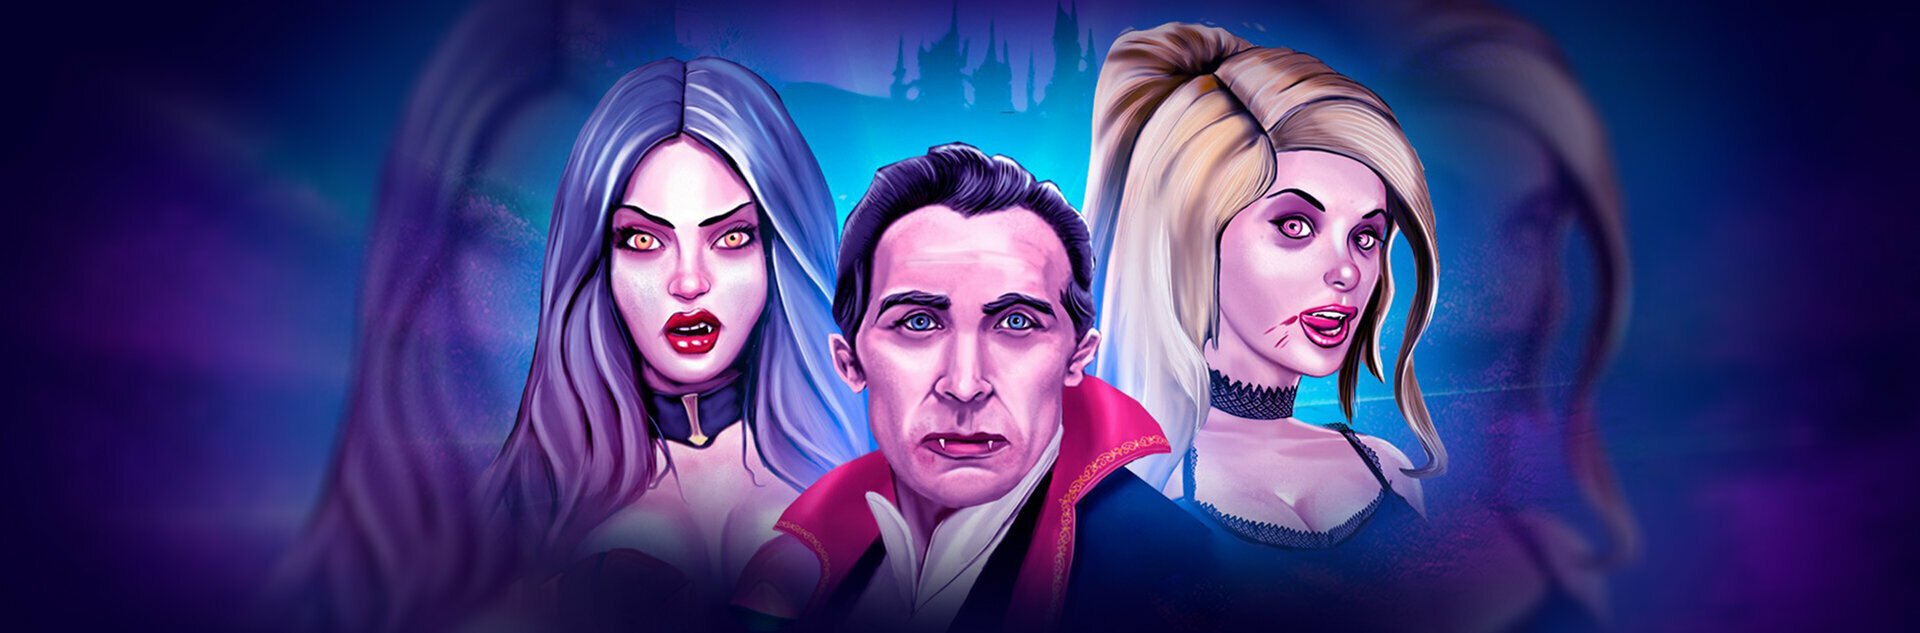 The Vampires Free Spins